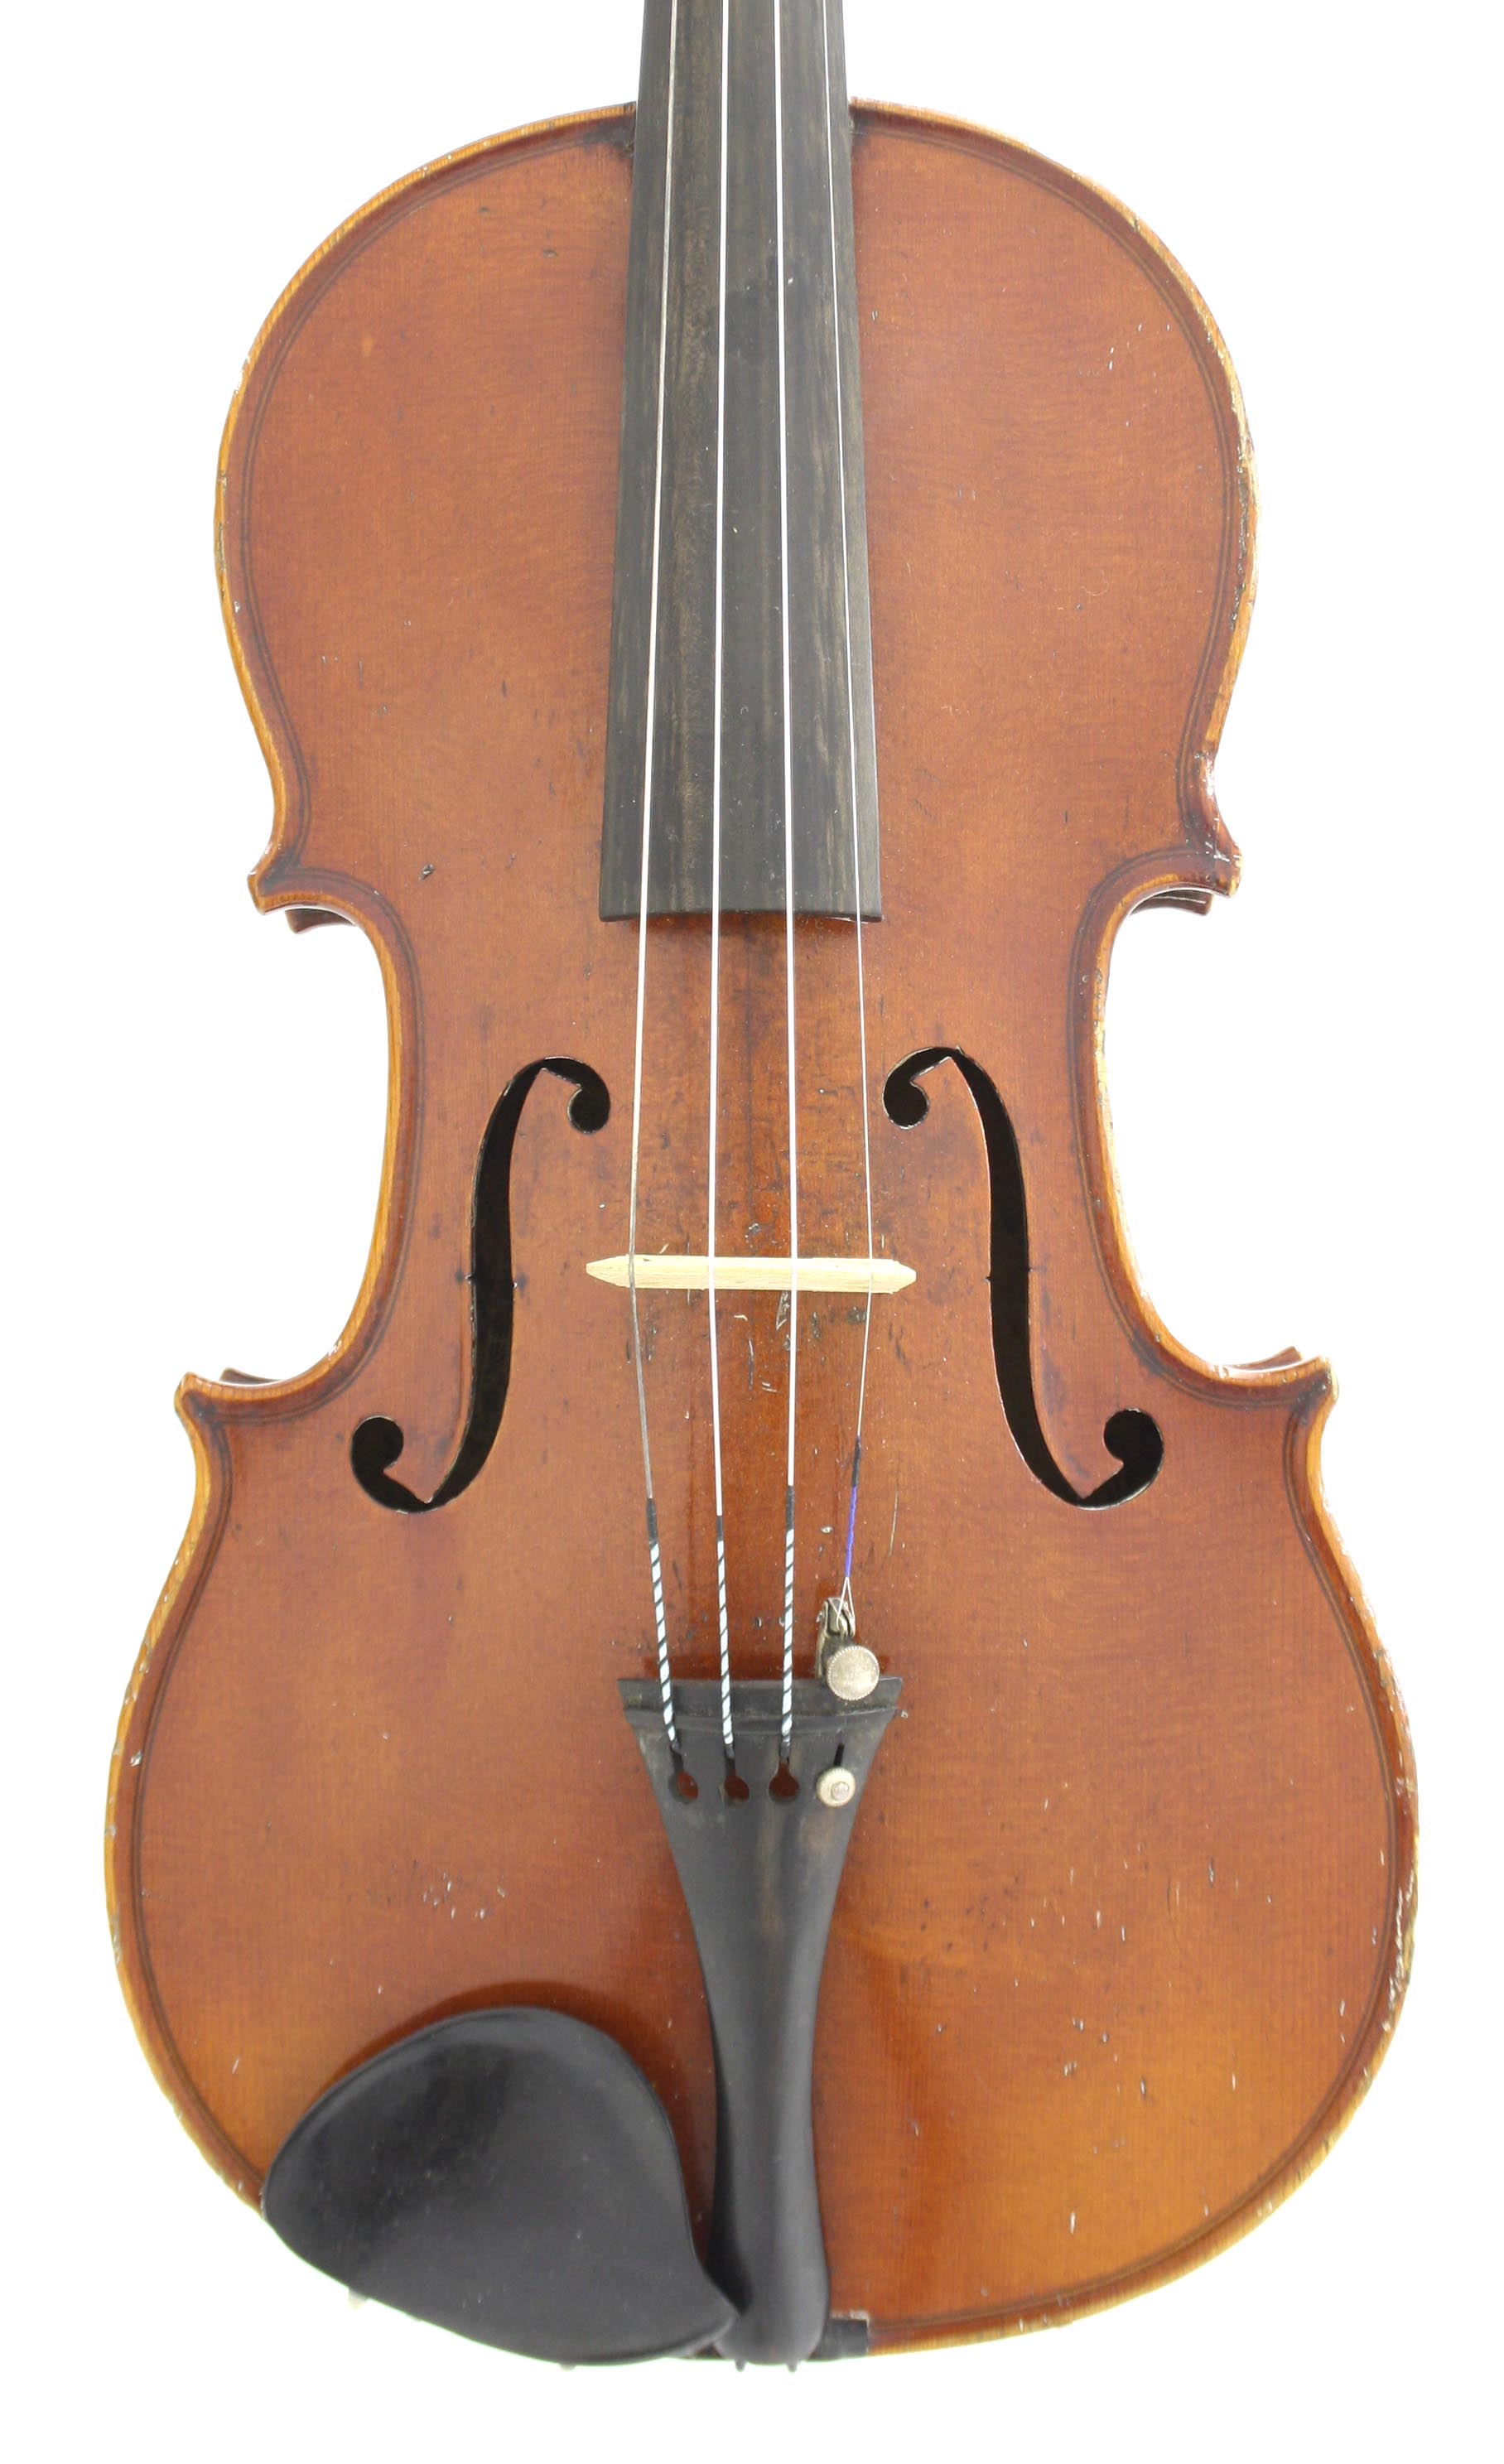 French violin by and labelled Francois Salzard, 14 5/16", 36.40cm